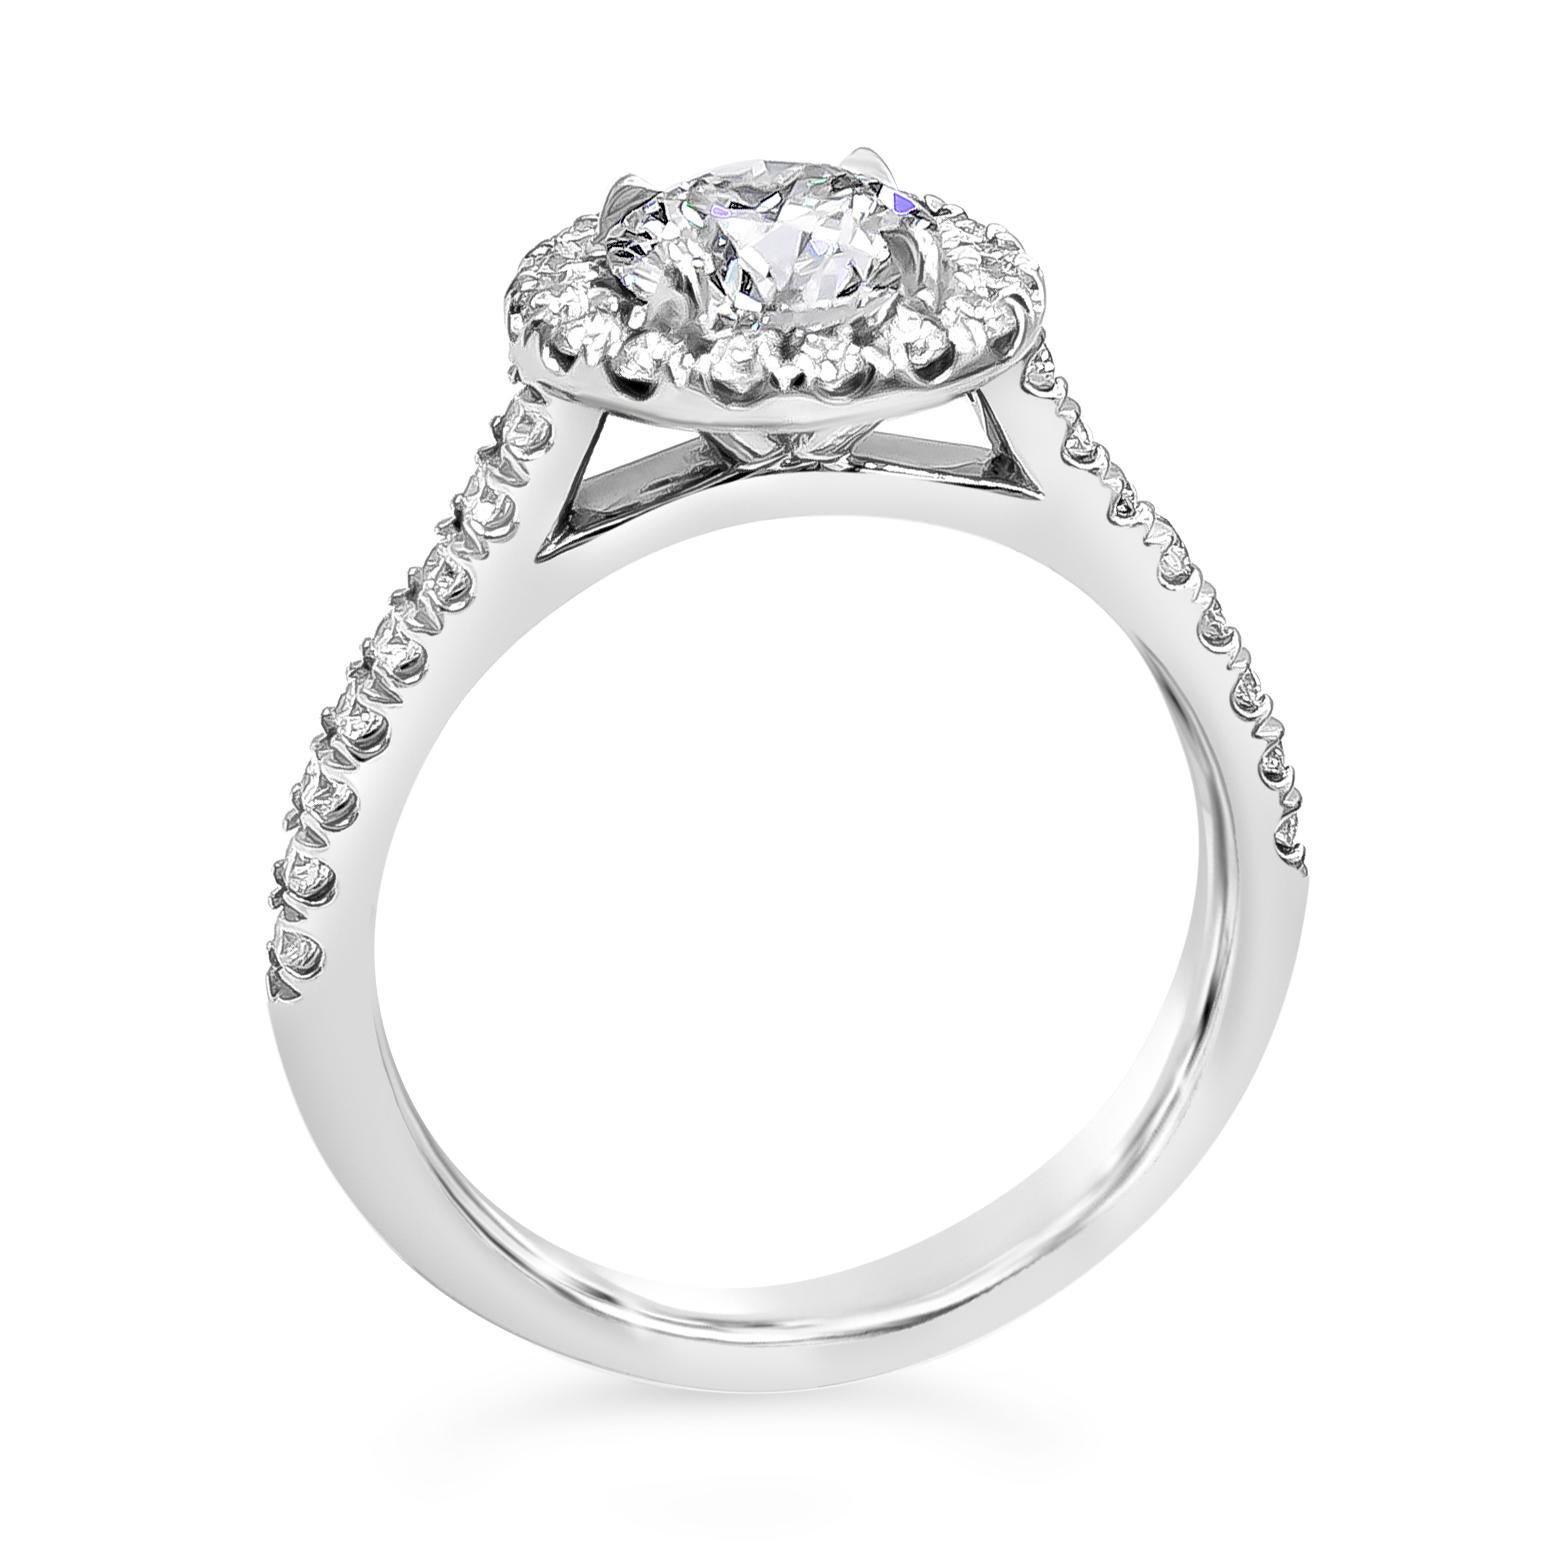 A classic and popular engagement ring style showcasing a 1.00 carat round brilliant diamond, certified by GIA as I color, SI1 clarity. Surrounding the diamond center is a single row of round brilliant diamonds, set on an accented pave mounting.